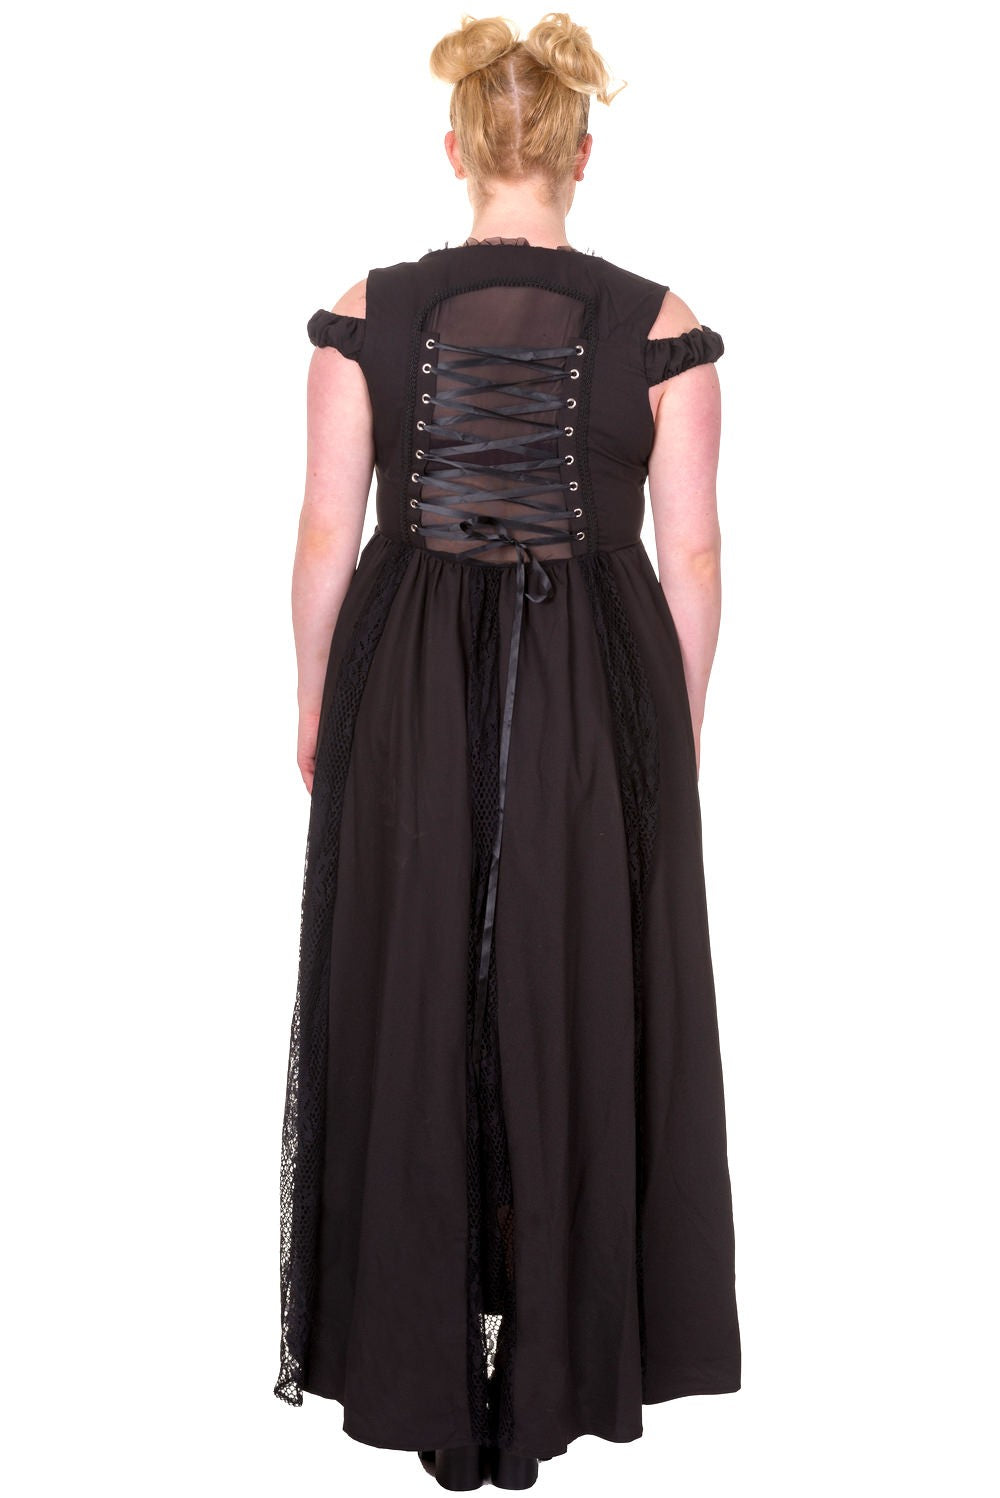 Victorian Corset Style Sleeveless Black Maxi Dress - SOLD OUT